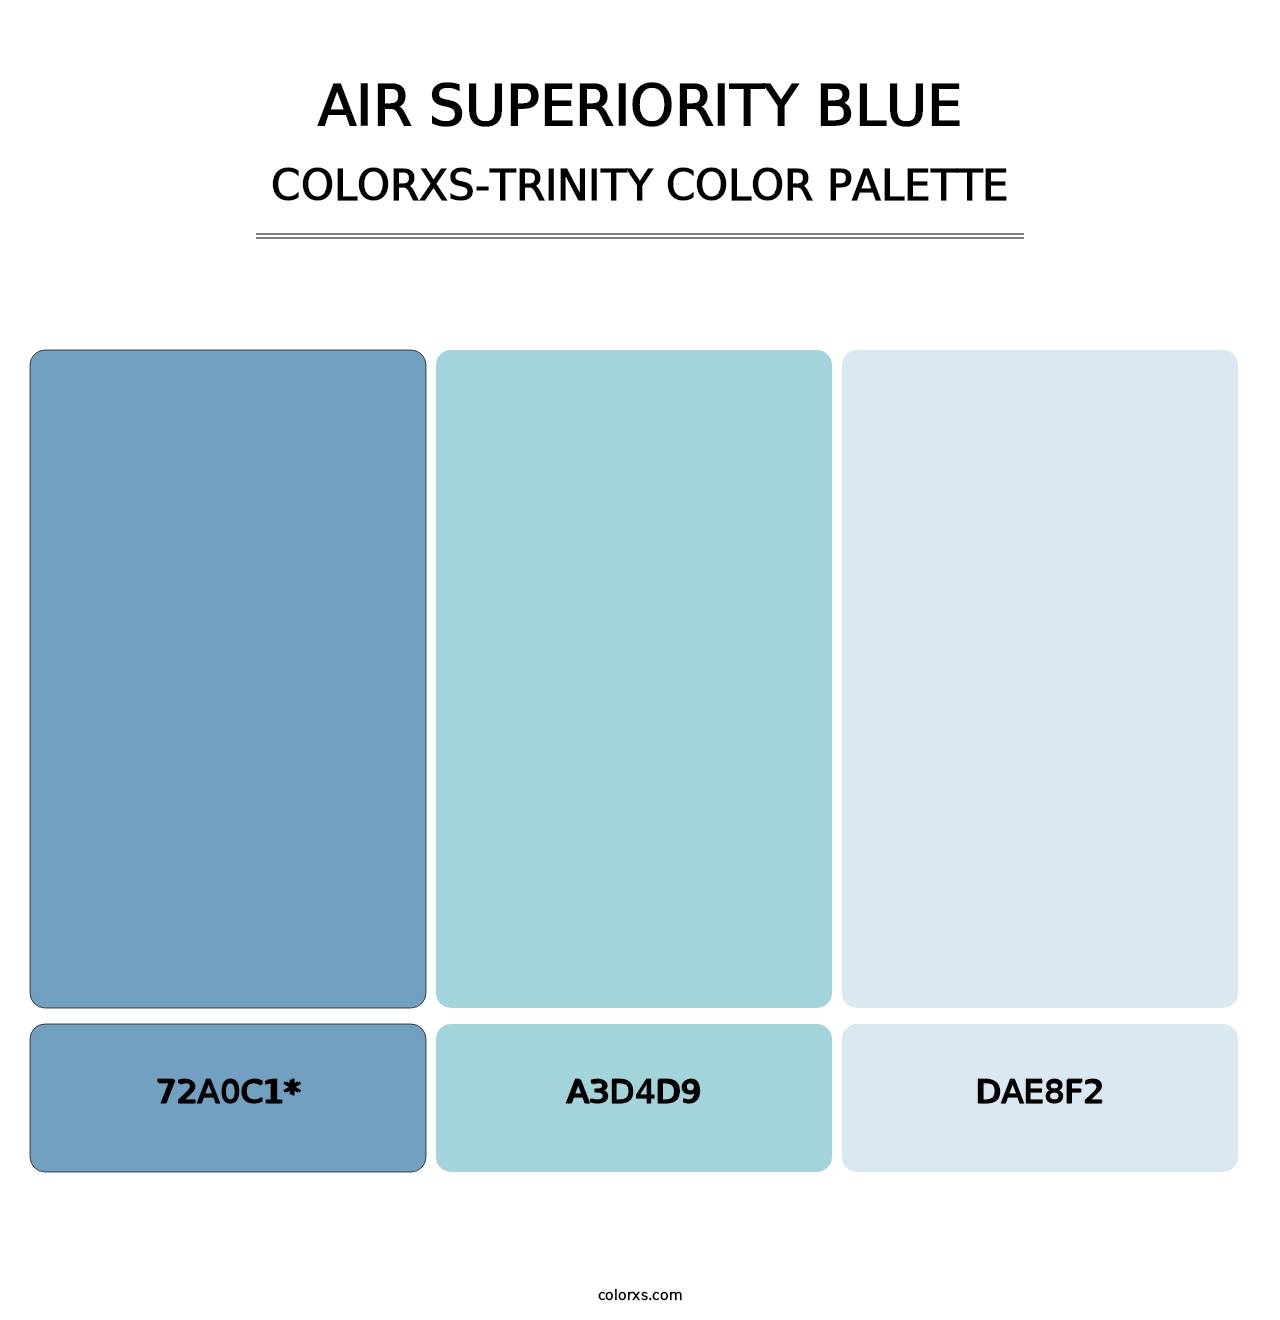 Air Superiority Blue - Colorxs Trinity Palette